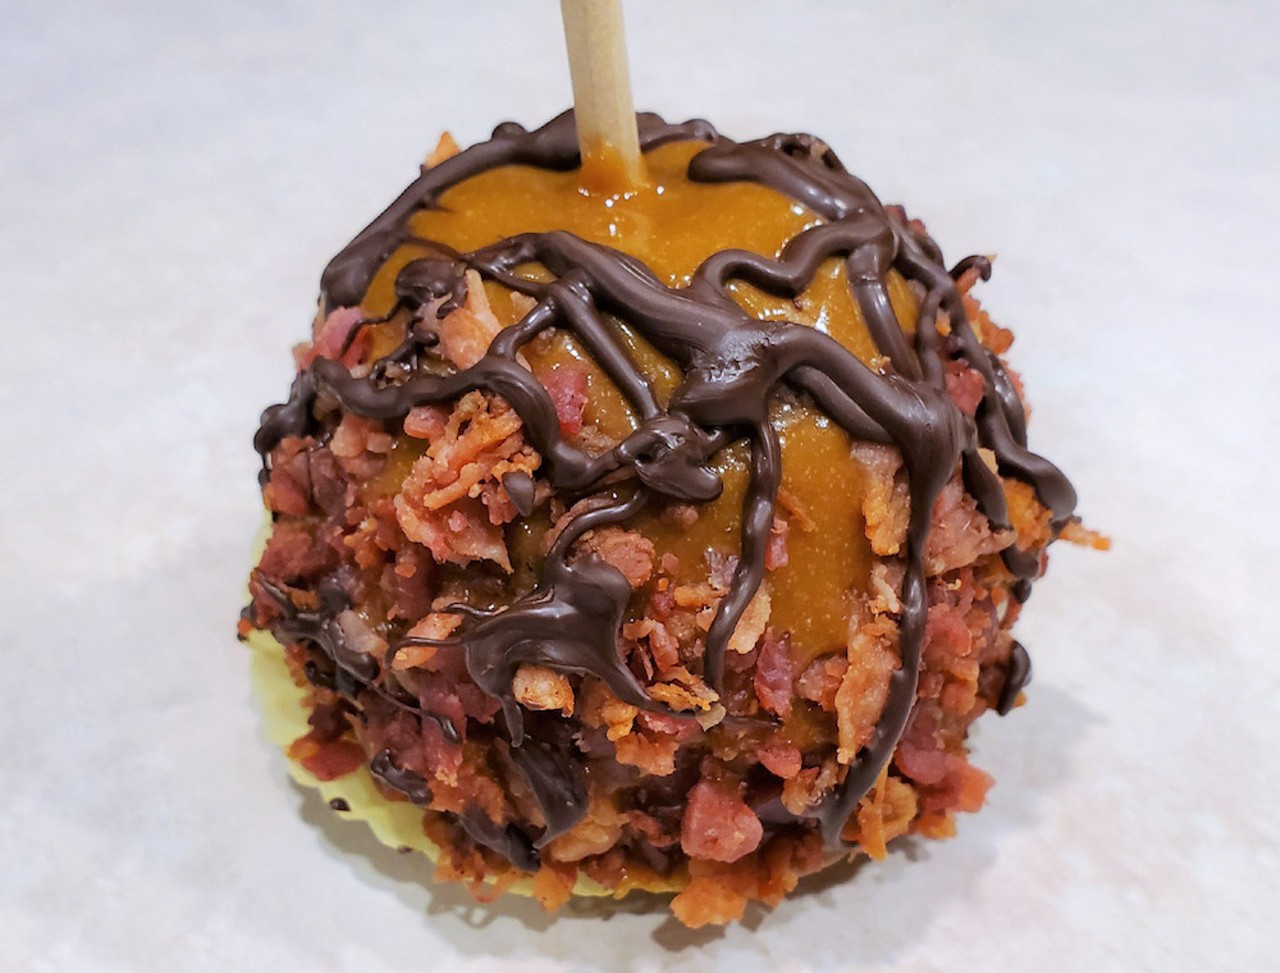 Bacon Caramel Apples           
"A crisp Granny Smith apple covered in rich house-made caramel, rolled in real bacon bits. Also available drizzled in chocolate!"                        Where to find it: The Apple Cart